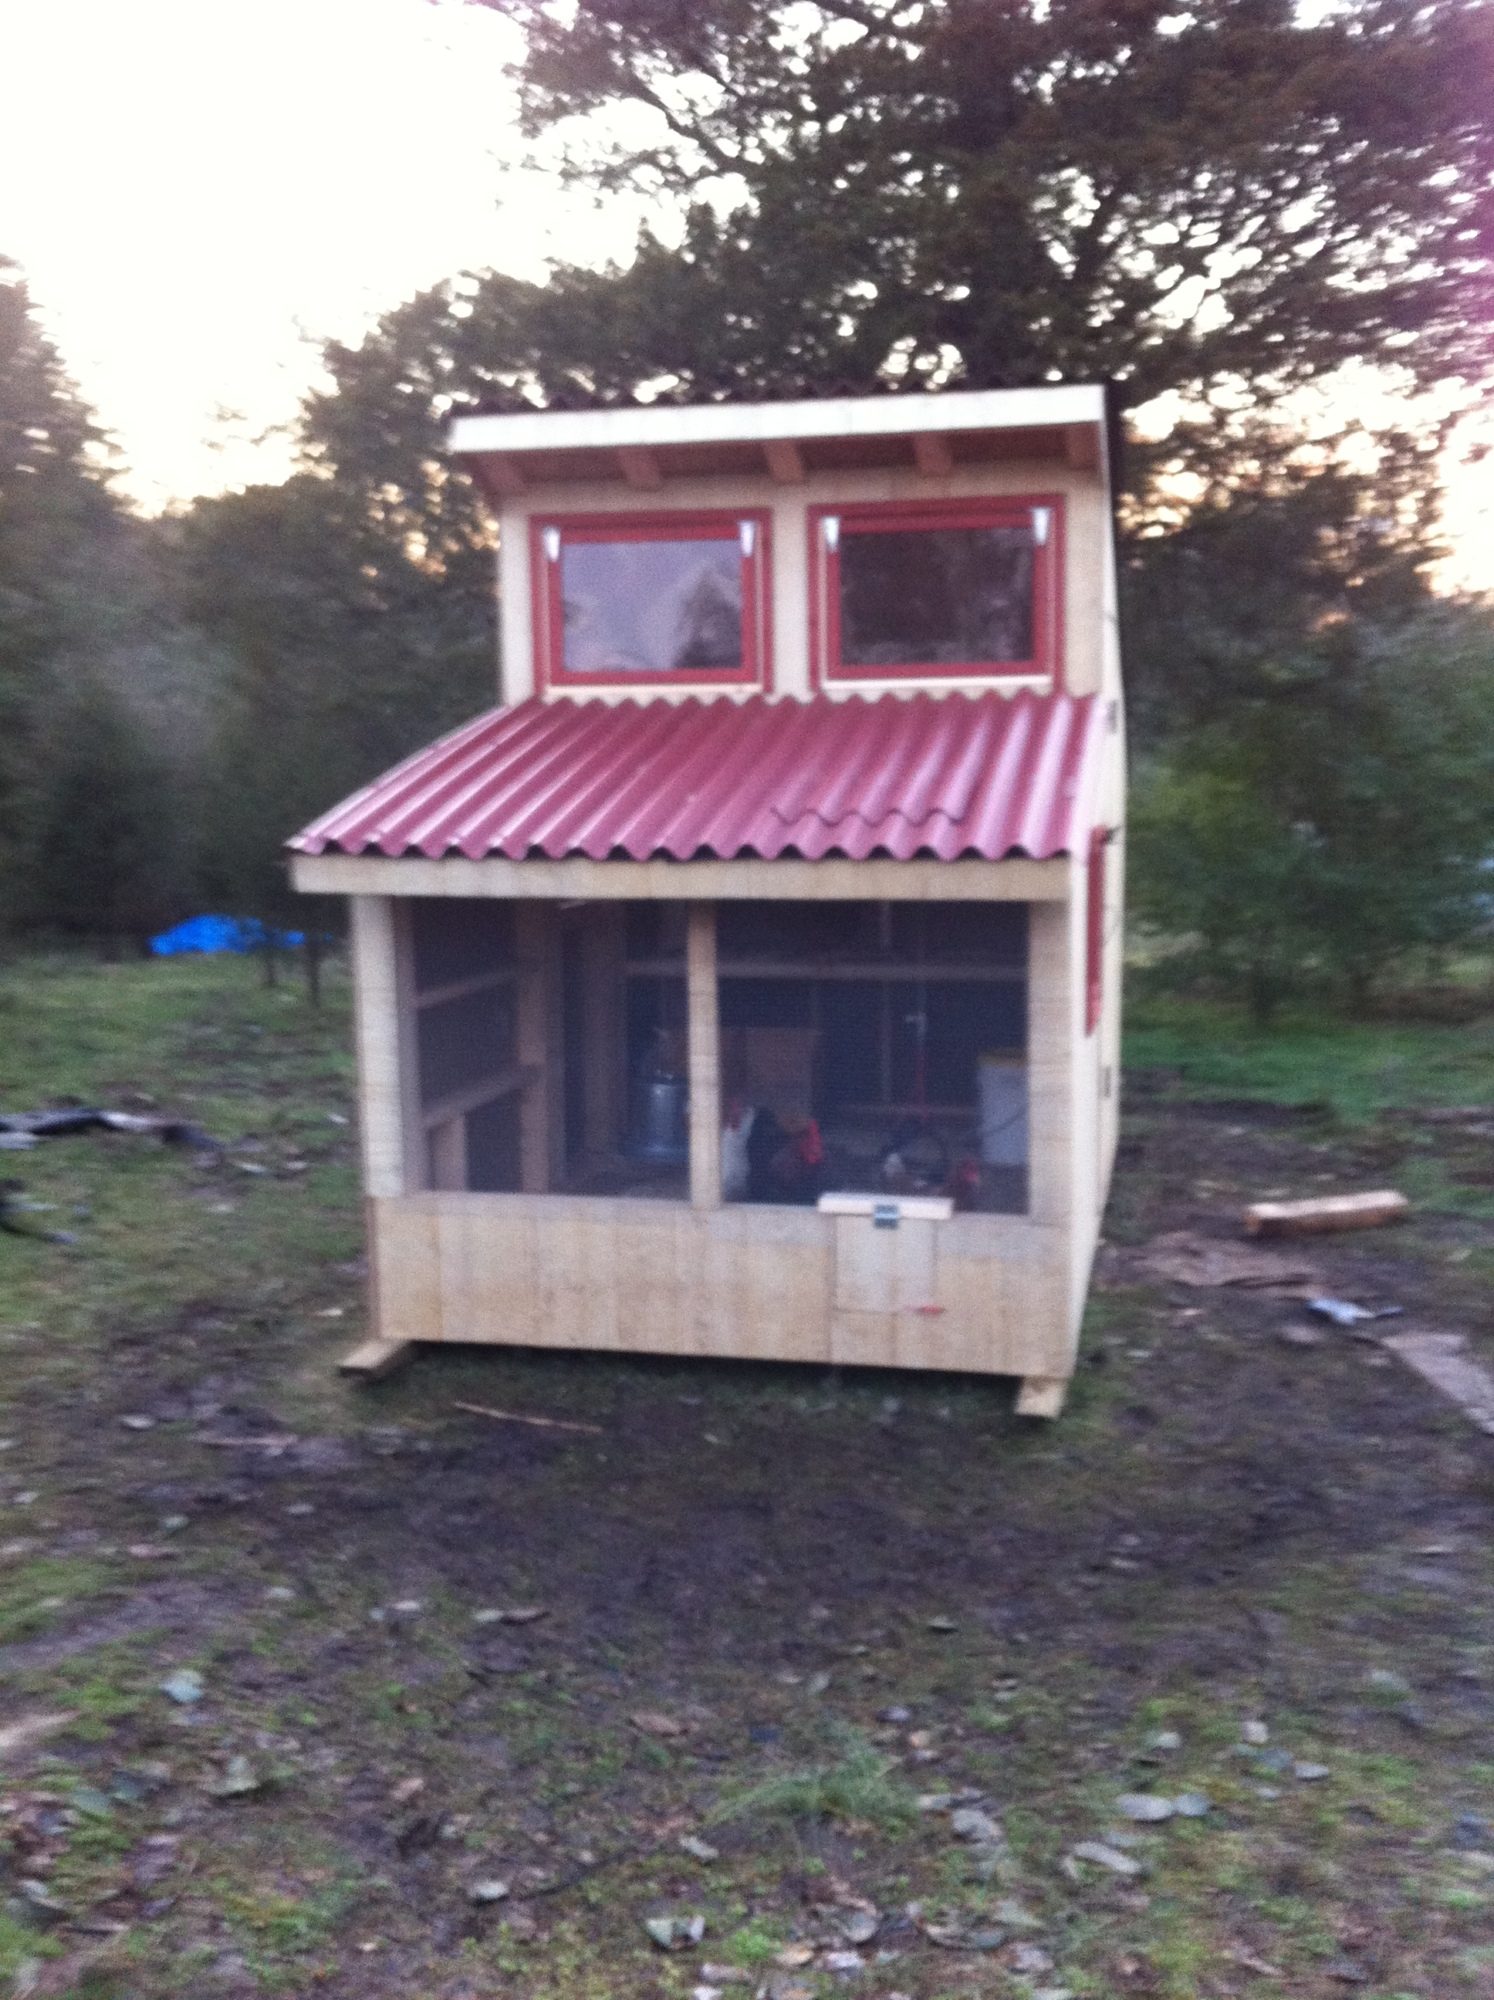 post your chicken coop pictures here! - Page 25